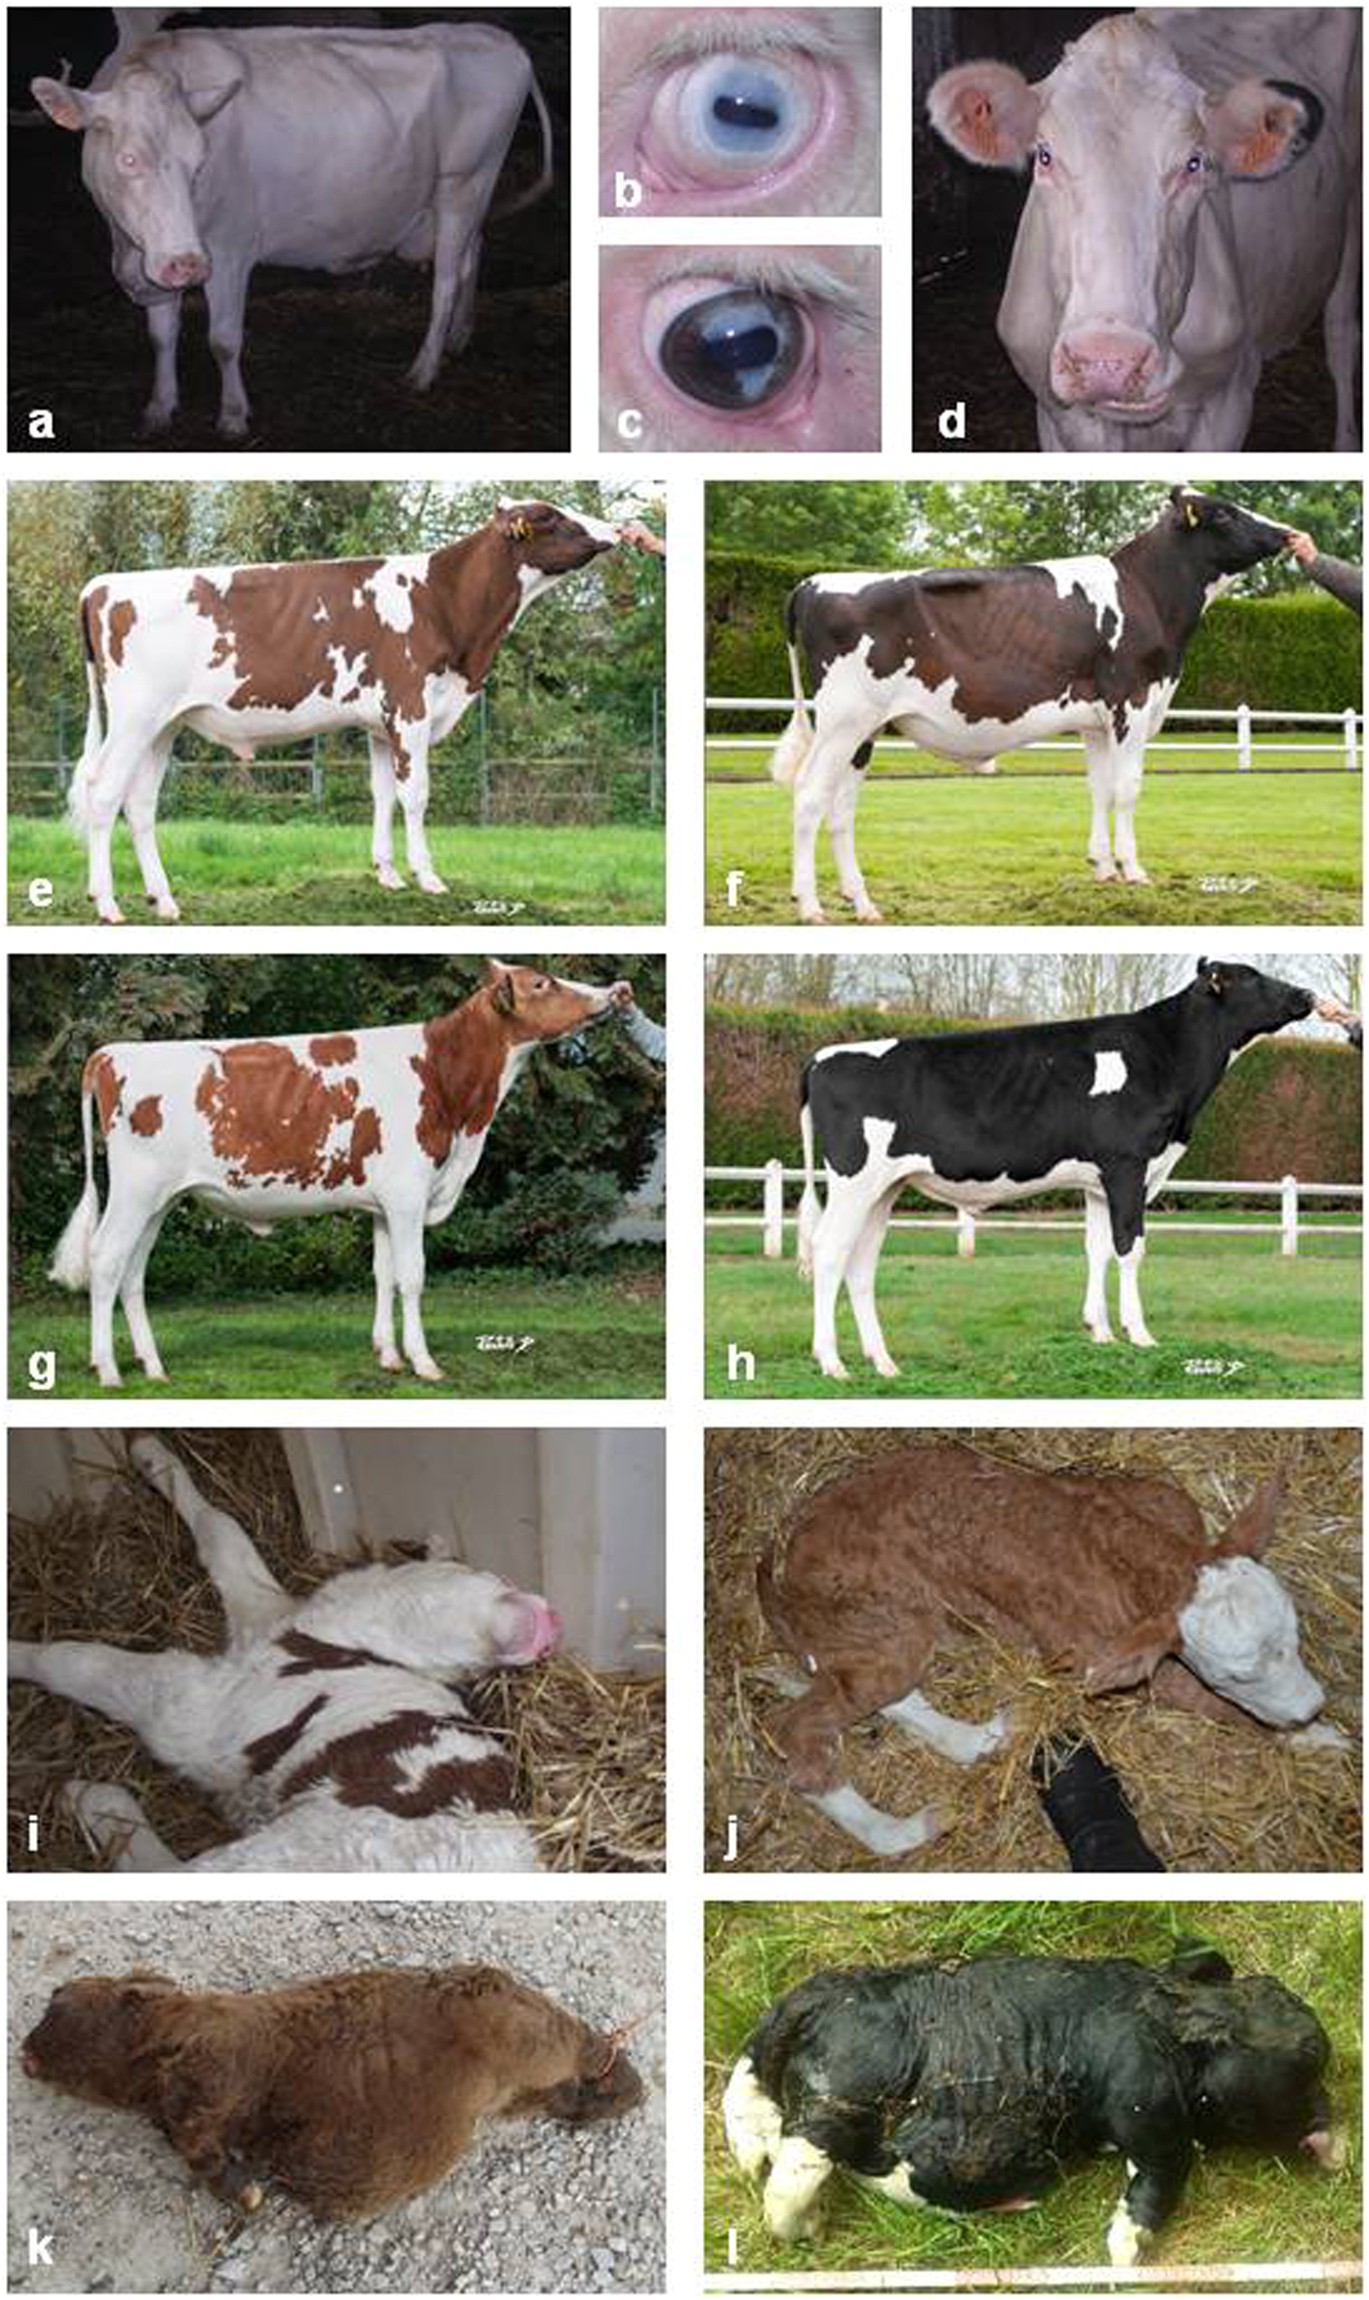 Rapid Discovery of De Novo Deleterious Mutations in Cattle Enhances the  Value of Livestock as Model Species | Scientific Reports